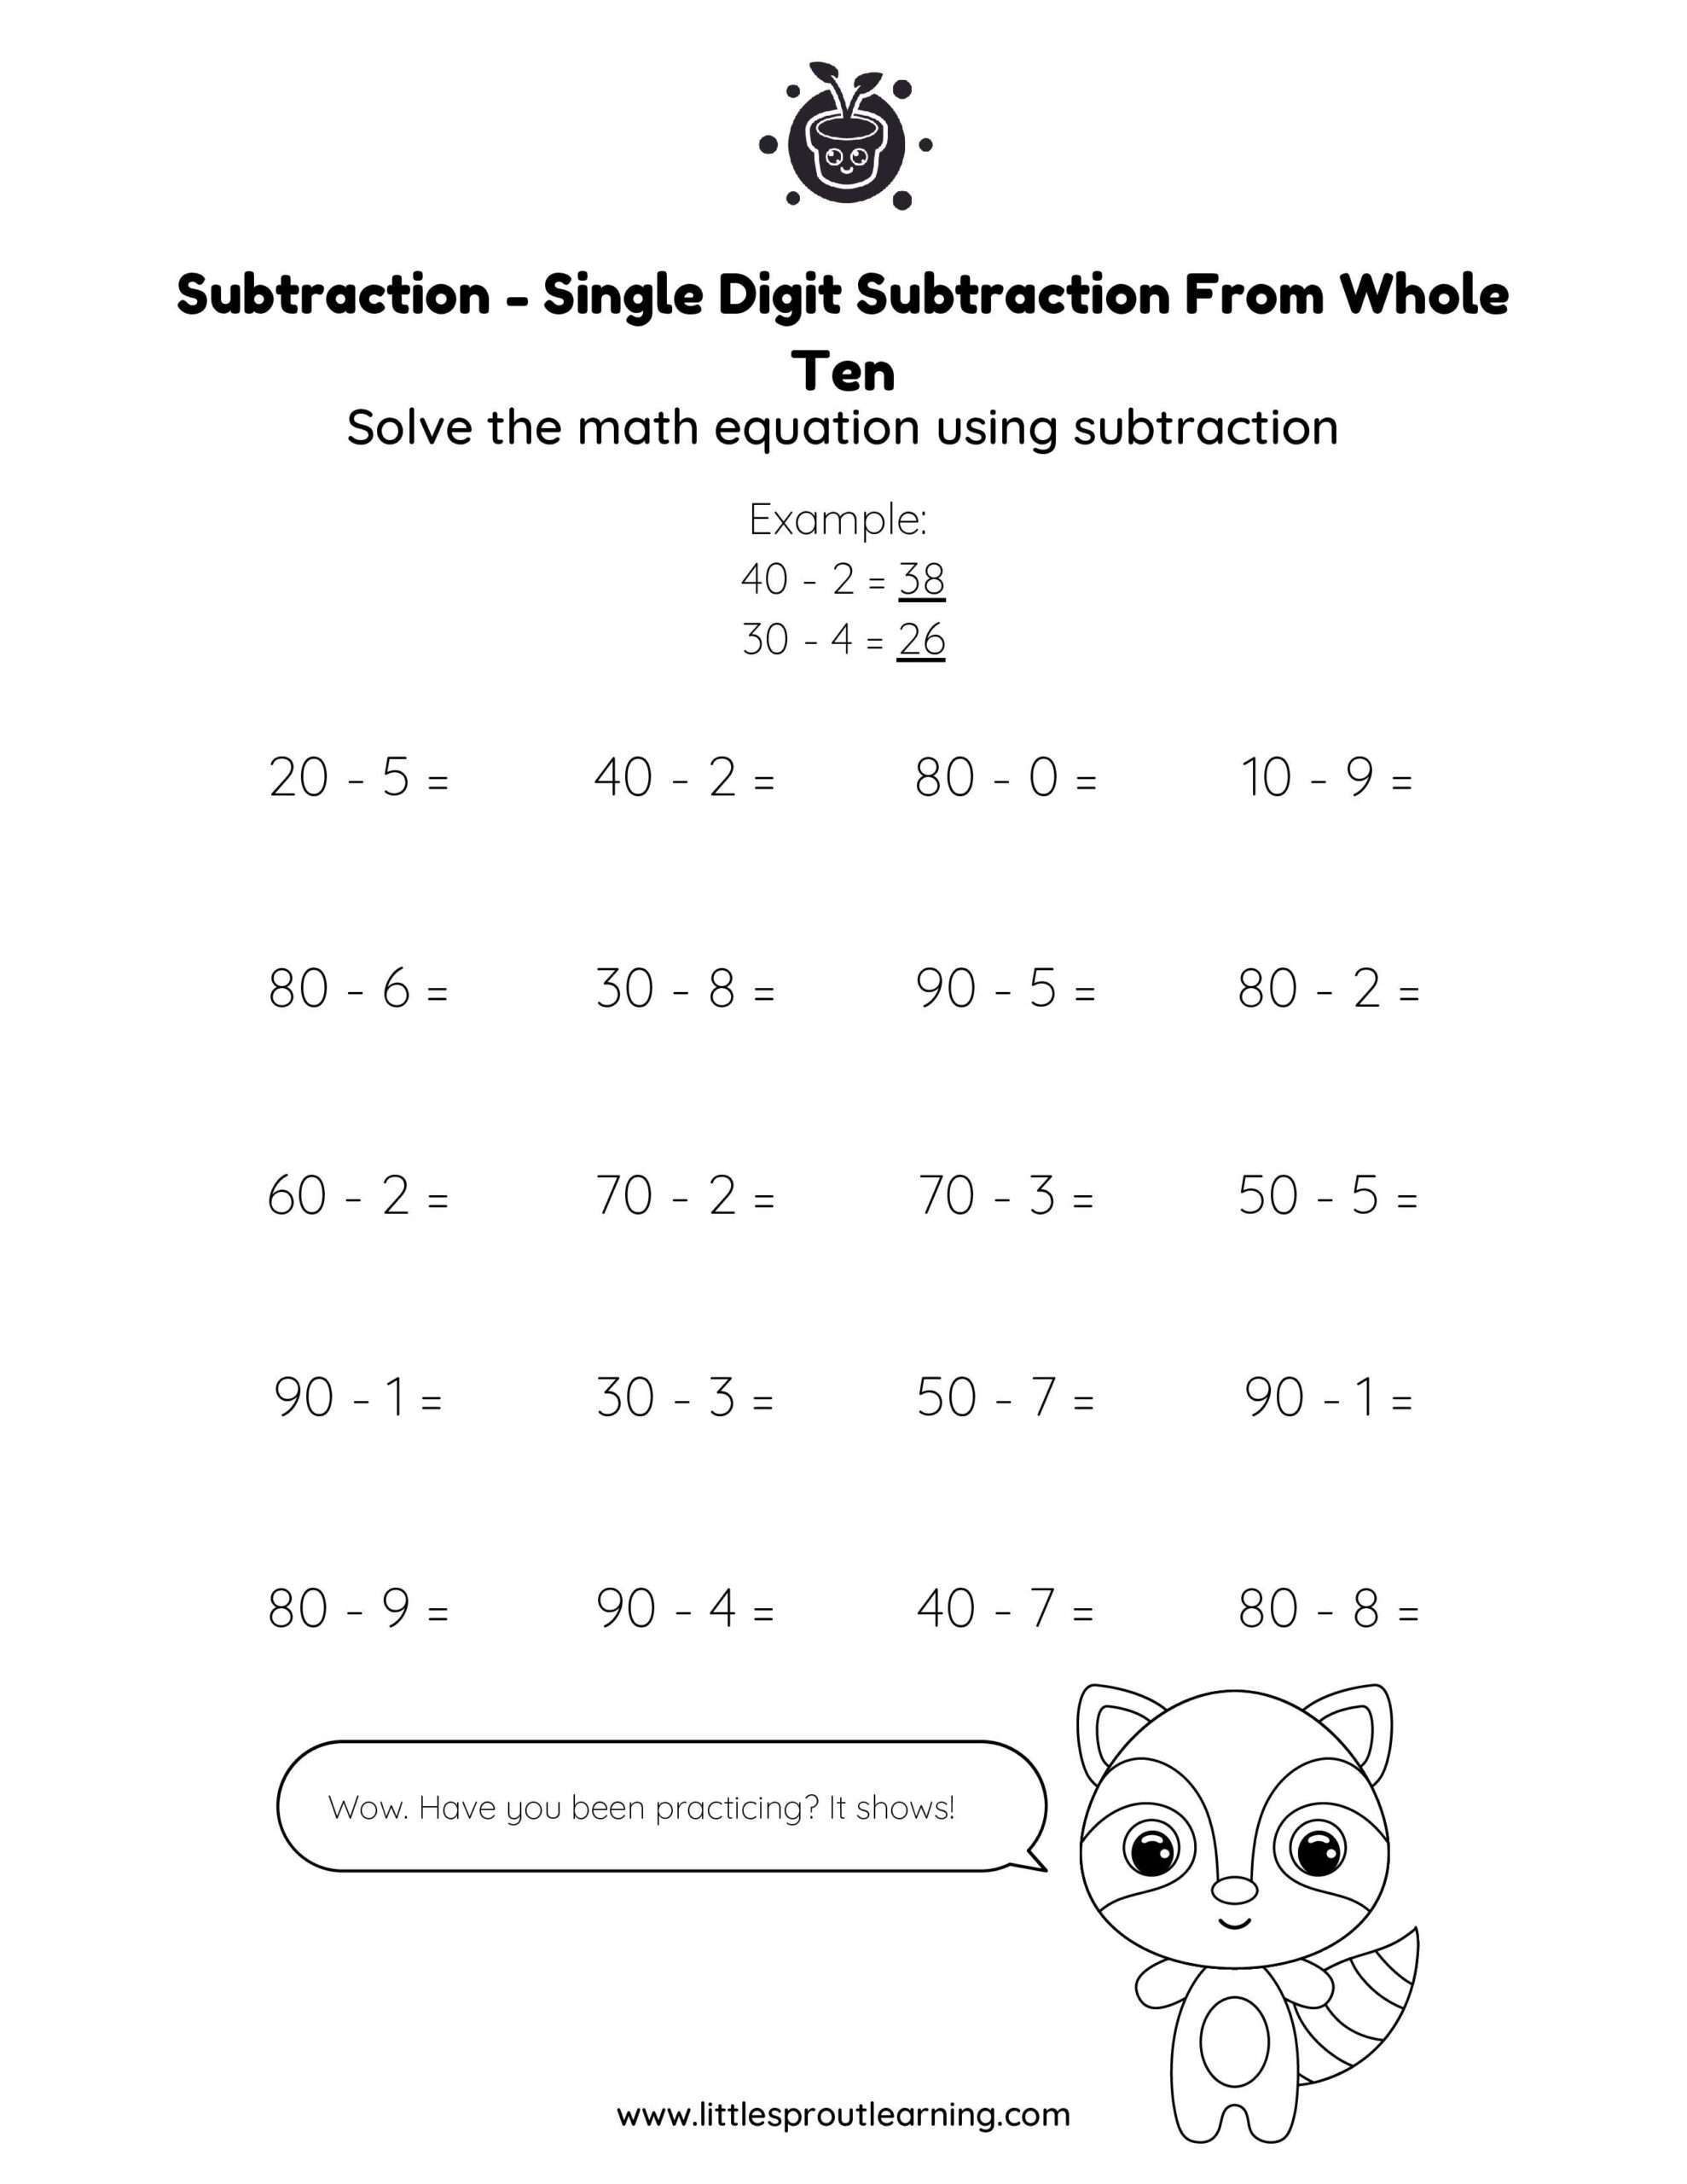 Single Digit Subtraction From Whole Ten